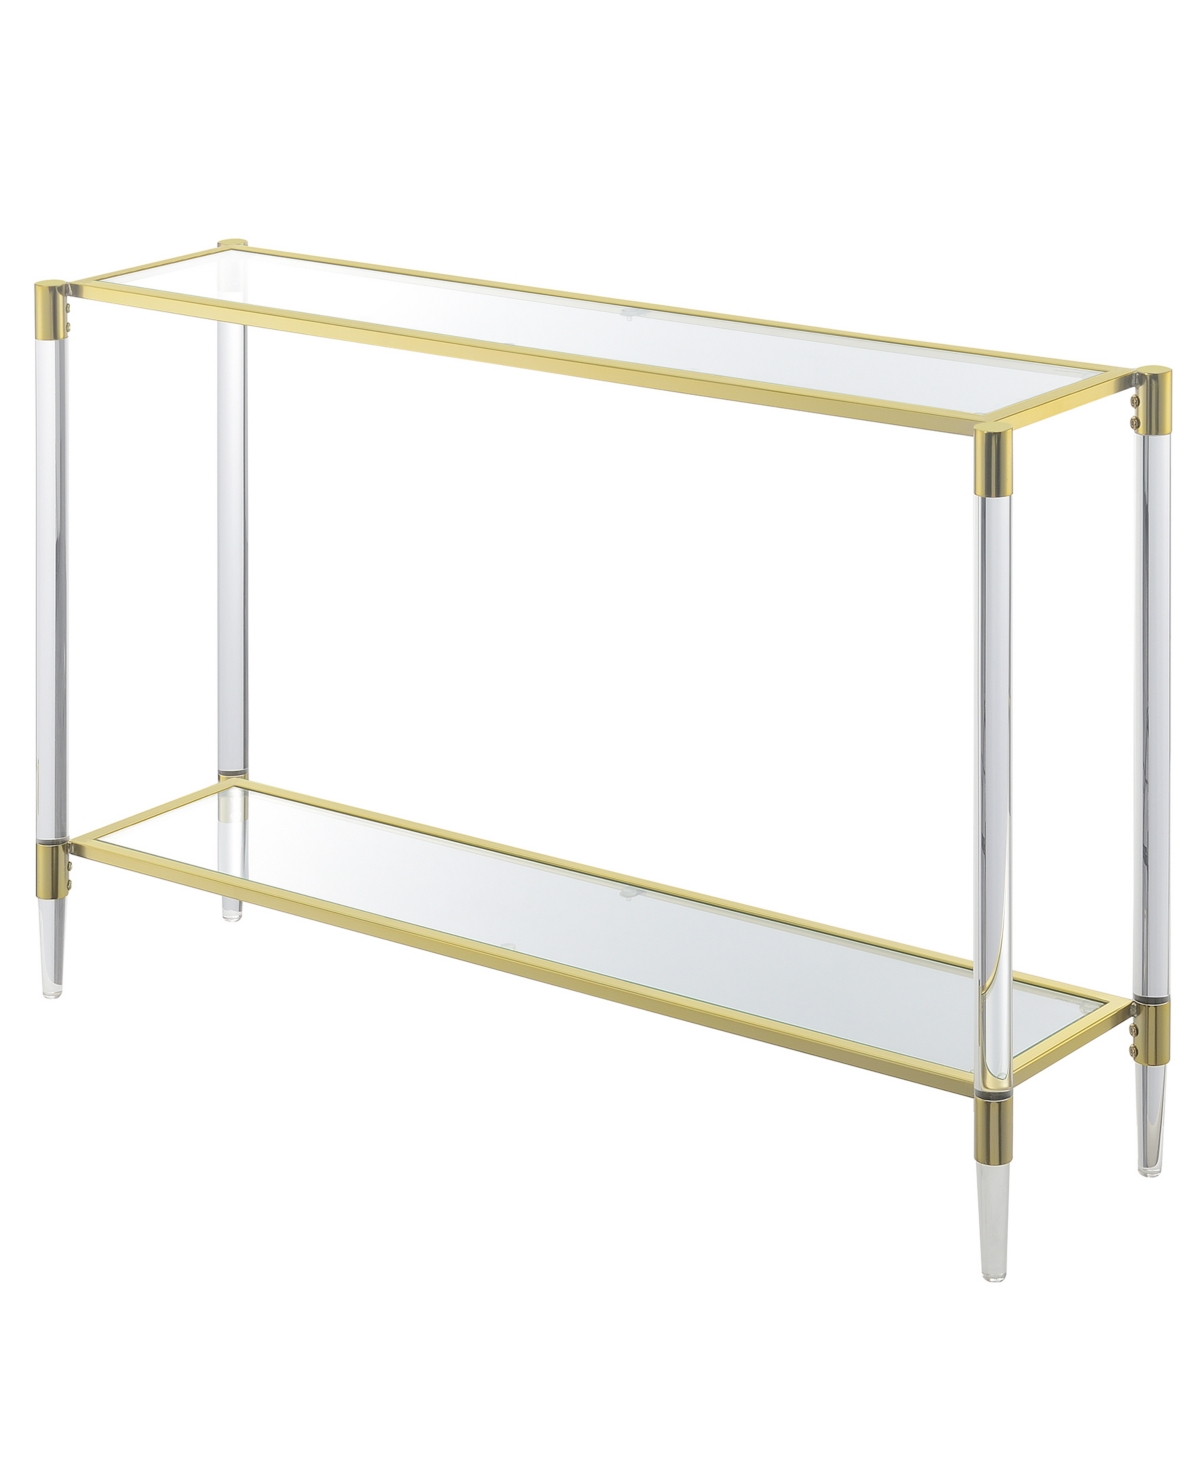 Convenience Concepts 44.25" Glass Royal Crest 2 Tier Acrylic Console Table In Gold,glass